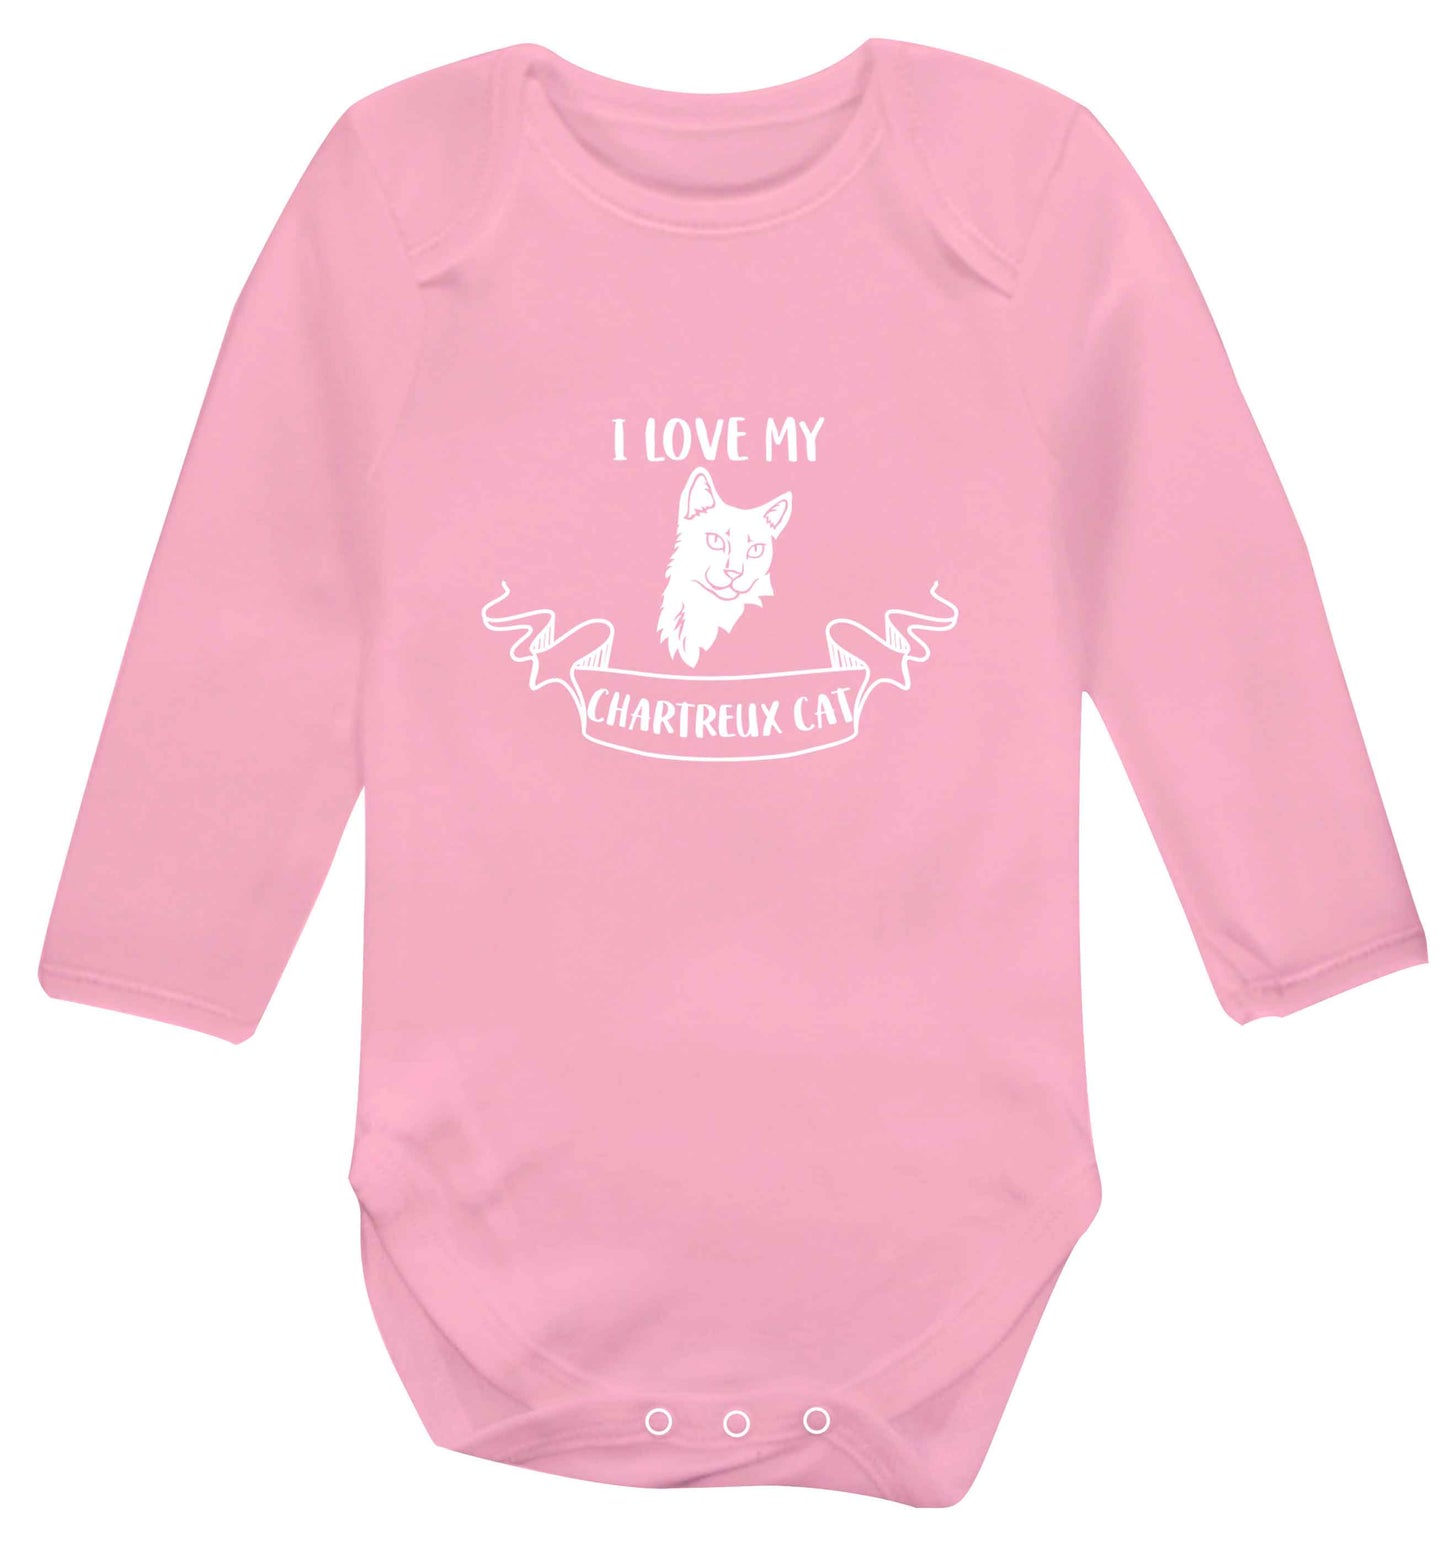 I love my chartreux cat baby vest long sleeved pale pink 6-12 months